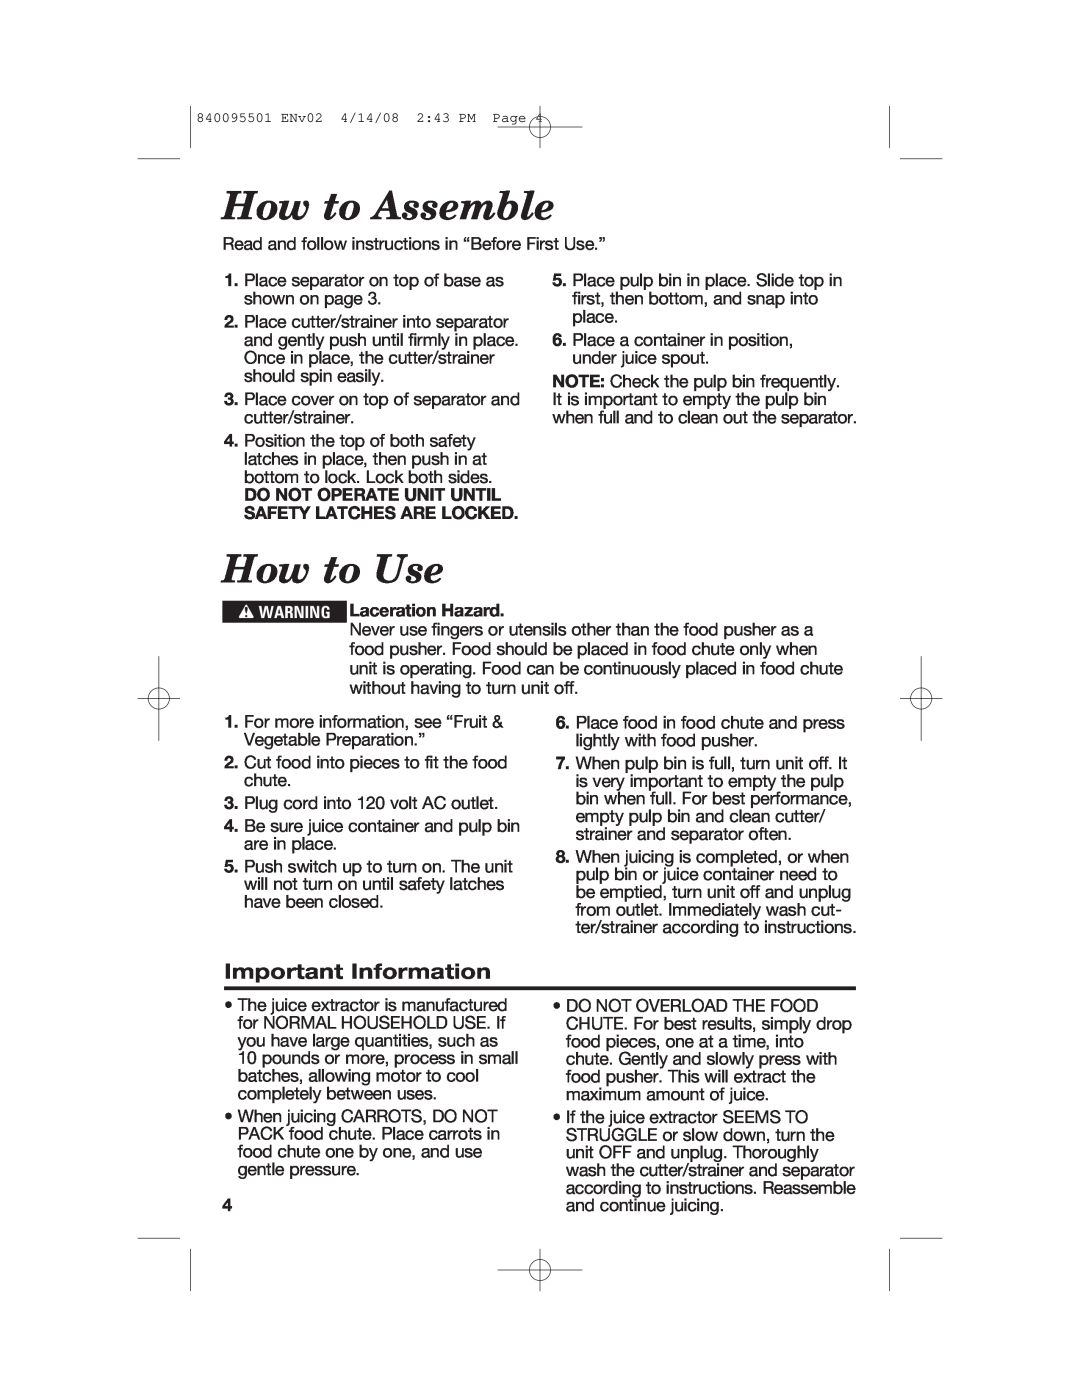 Hamilton Beach 840095501 manual How to Assemble, How to Use, Important Information, w WARNING Laceration Hazard 